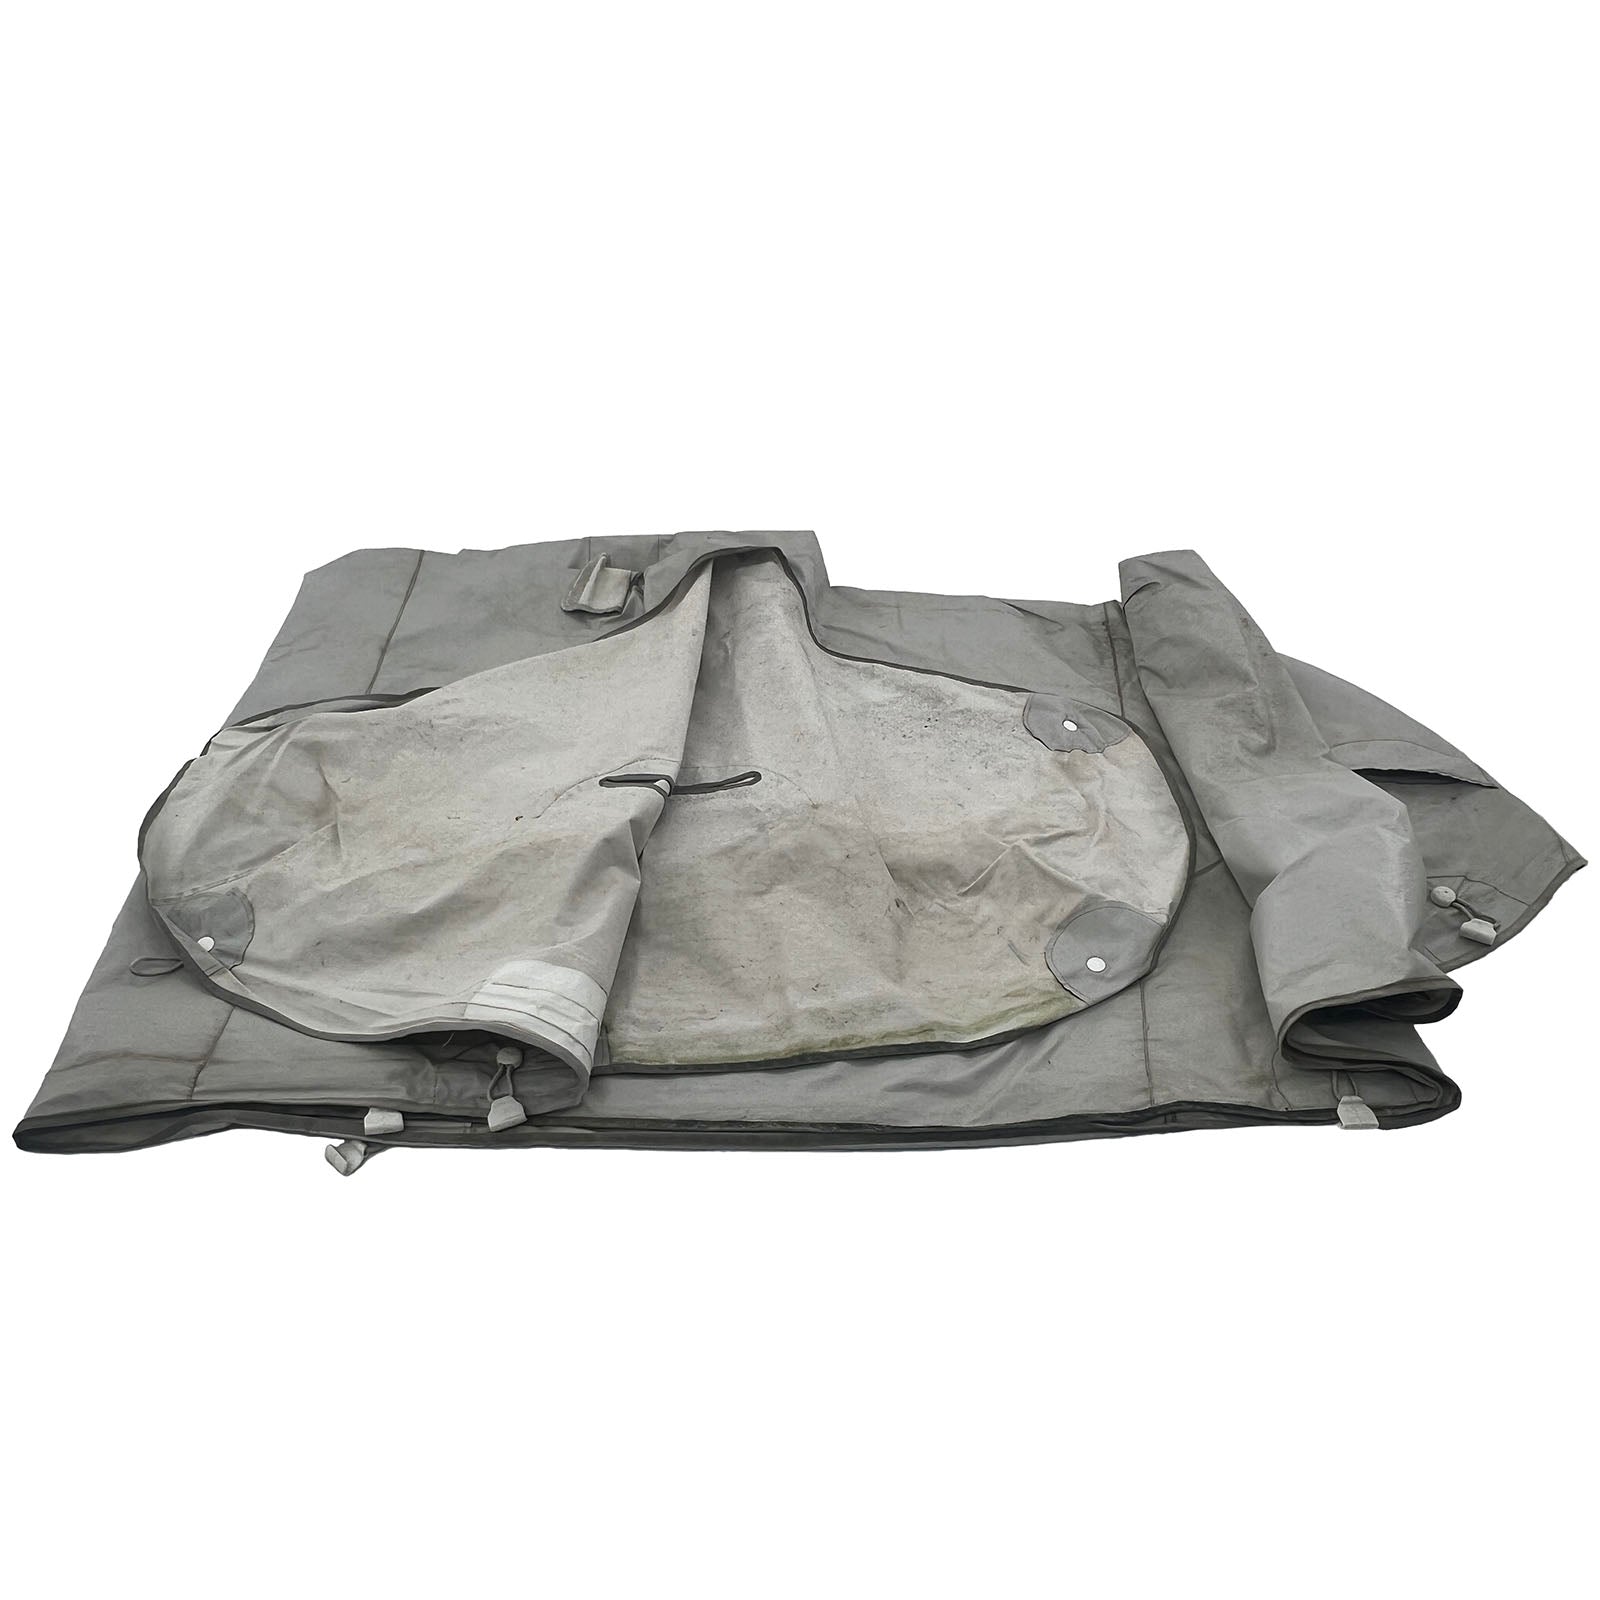 FAQ Friday #36 – My boat cover is generally in good condition but rather grubby and a bit mouldy, should I get a new one?